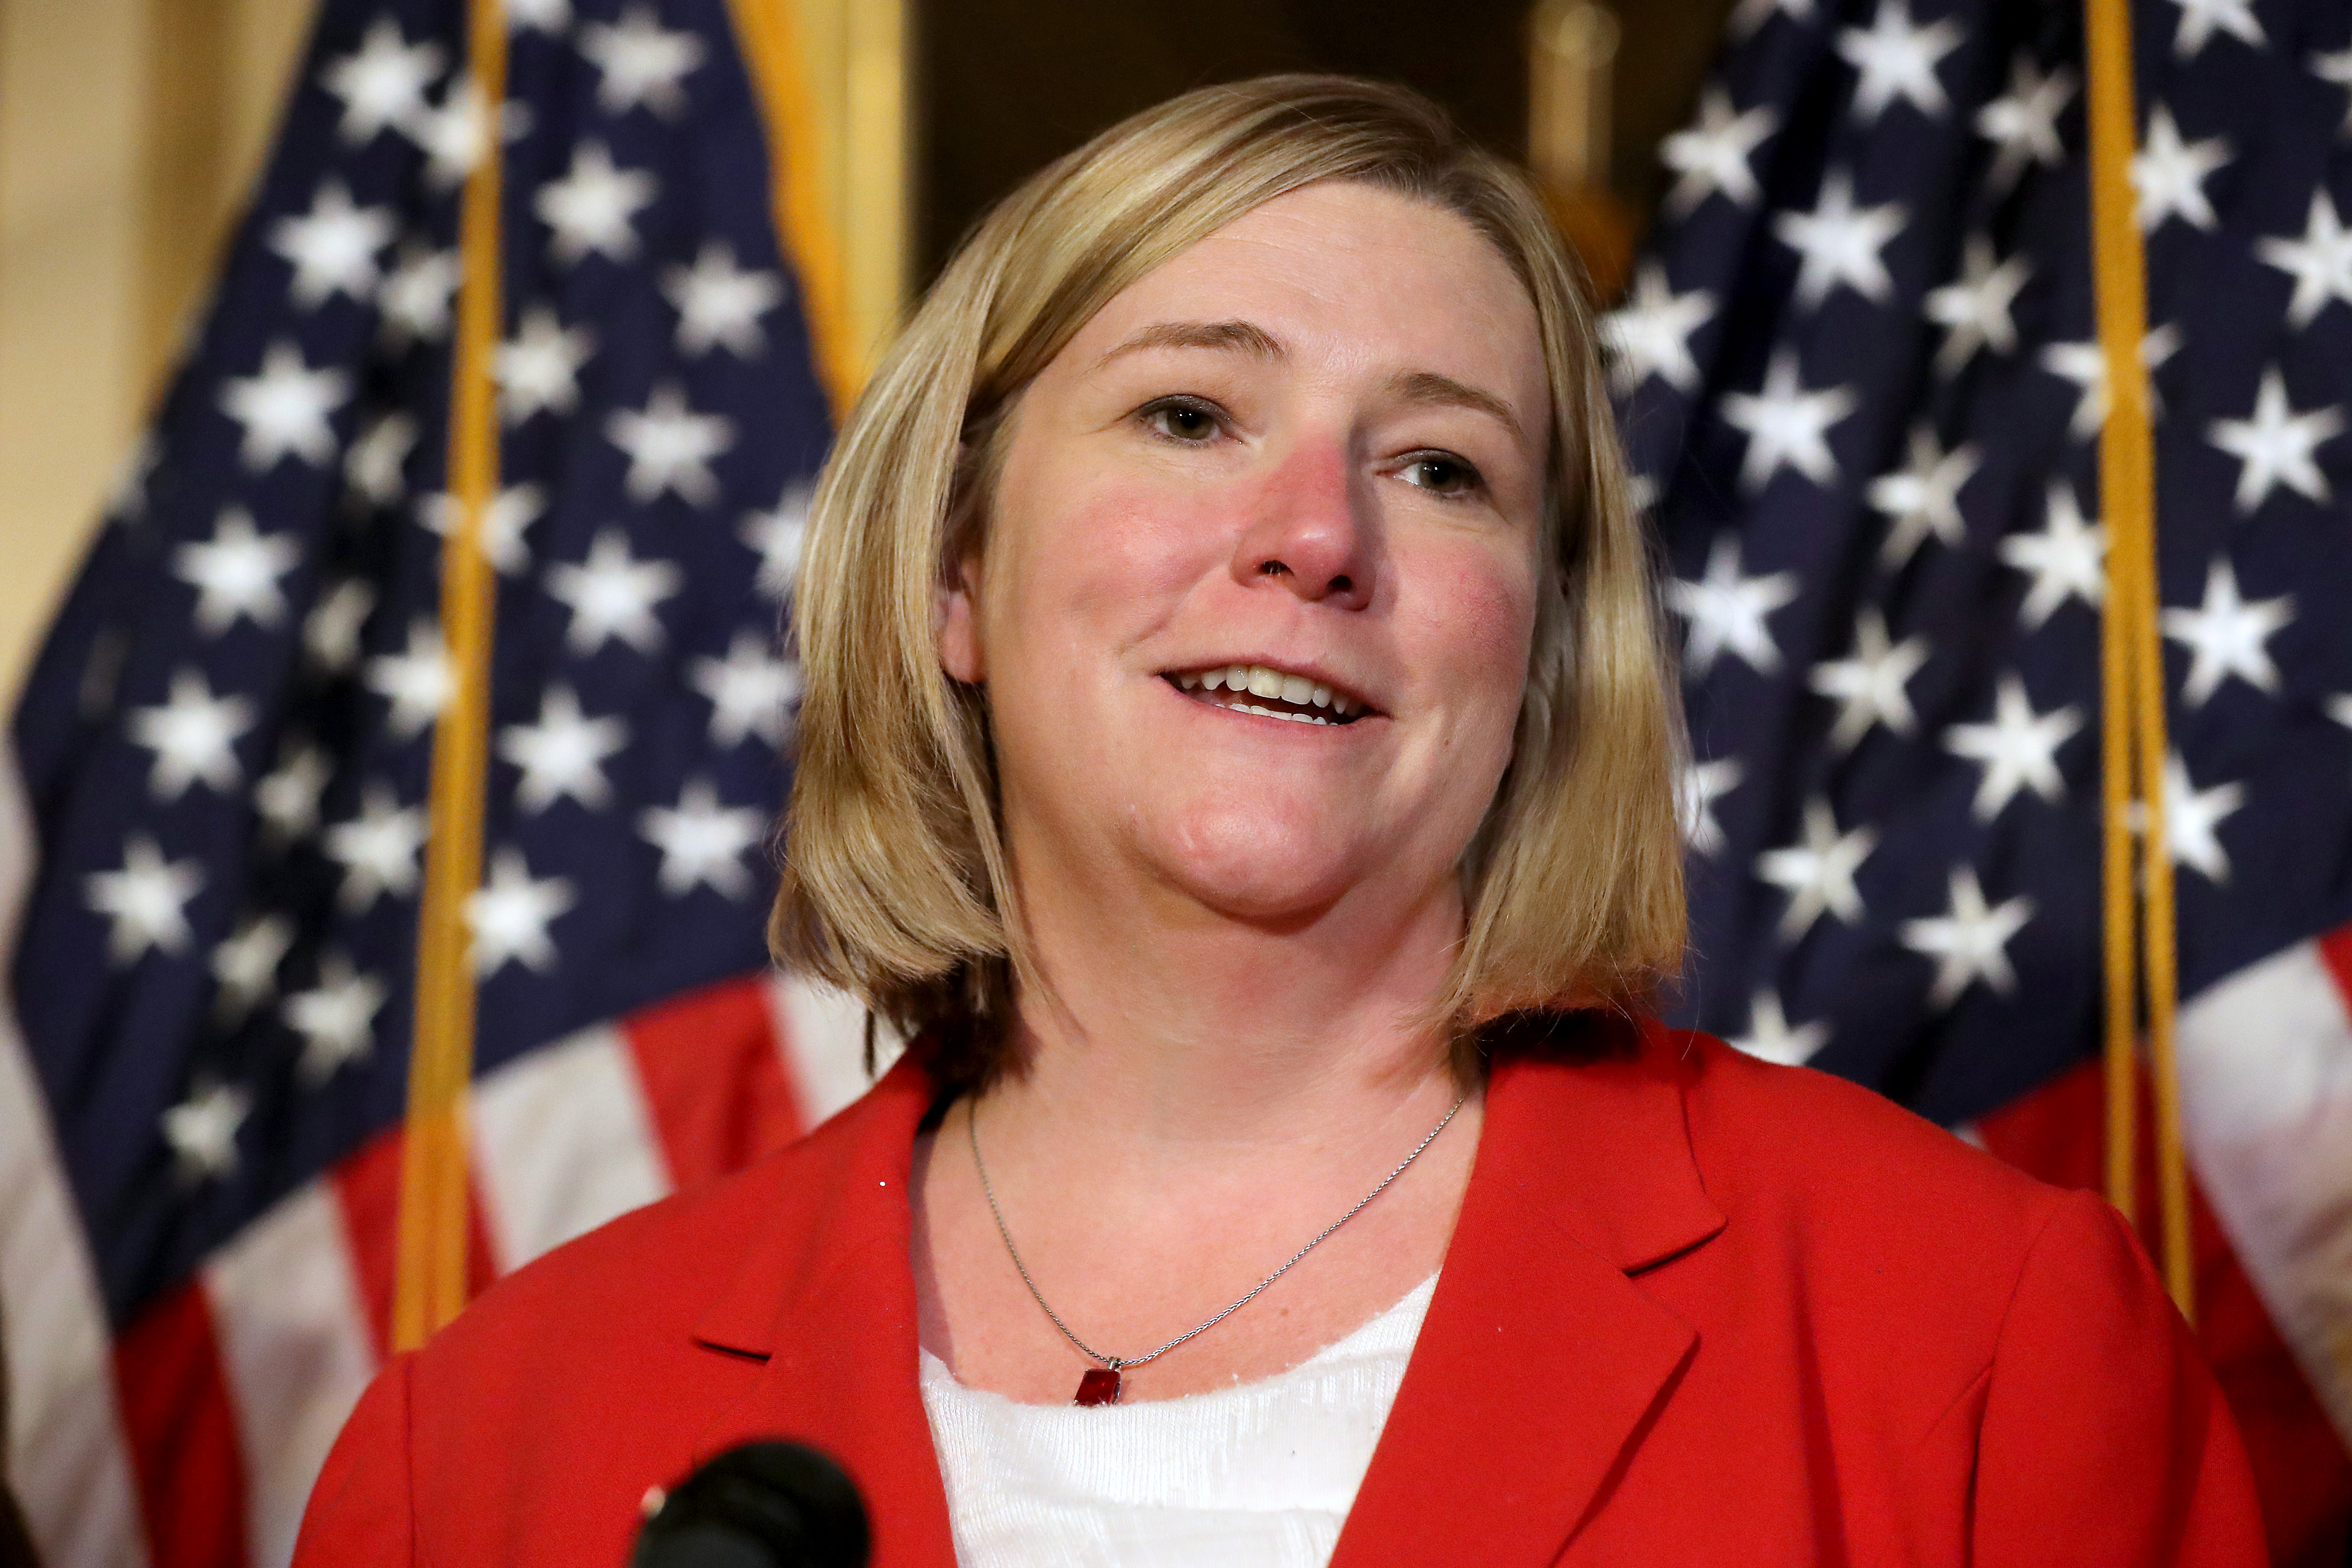 Nan Whaley, mayor of Dayton, Ohio, speaks during a news conference at the US Capitol on September 9, 2019.